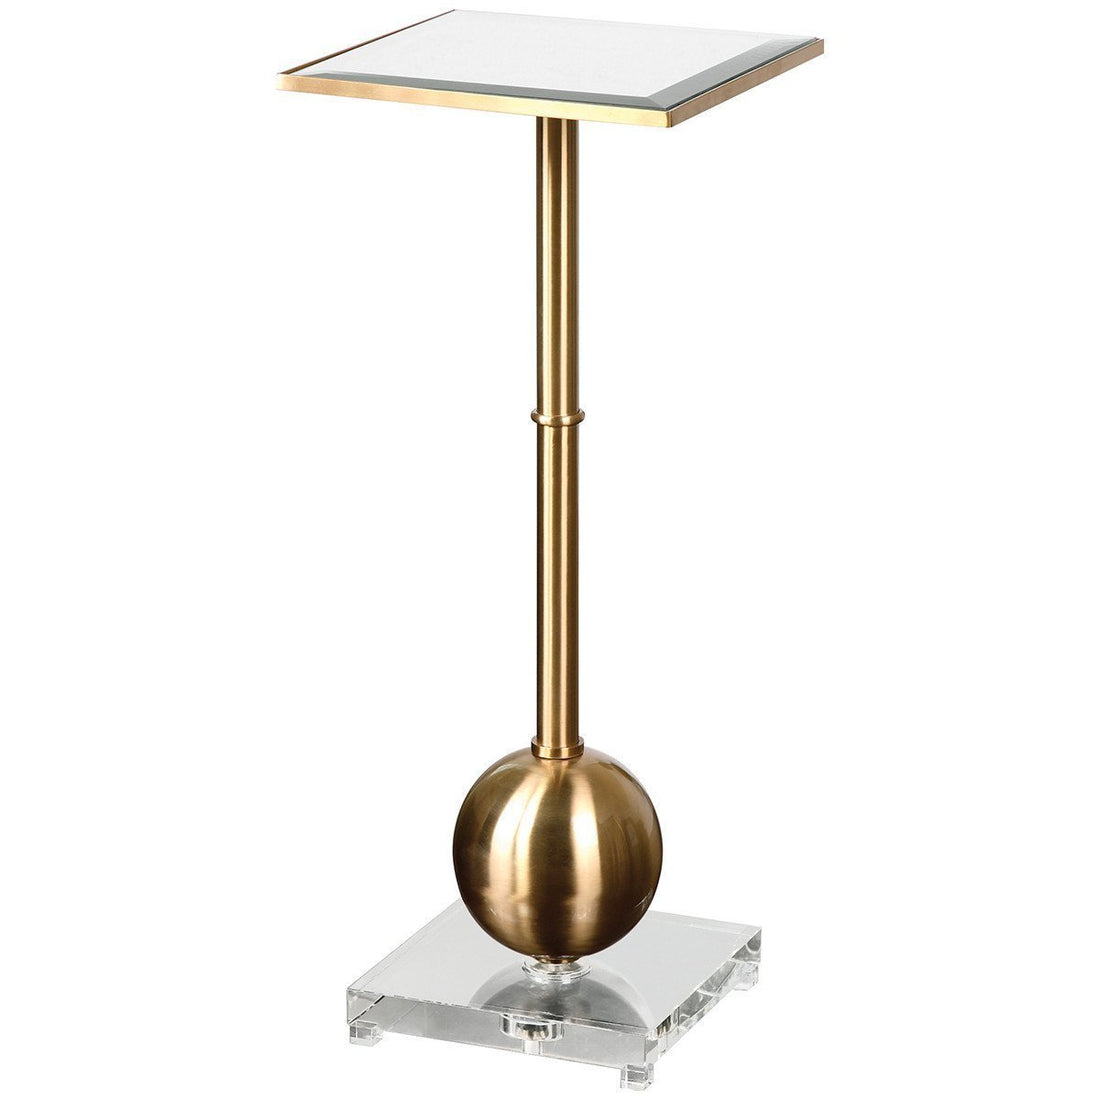 Uttermost Laton Mirrored Accent Table